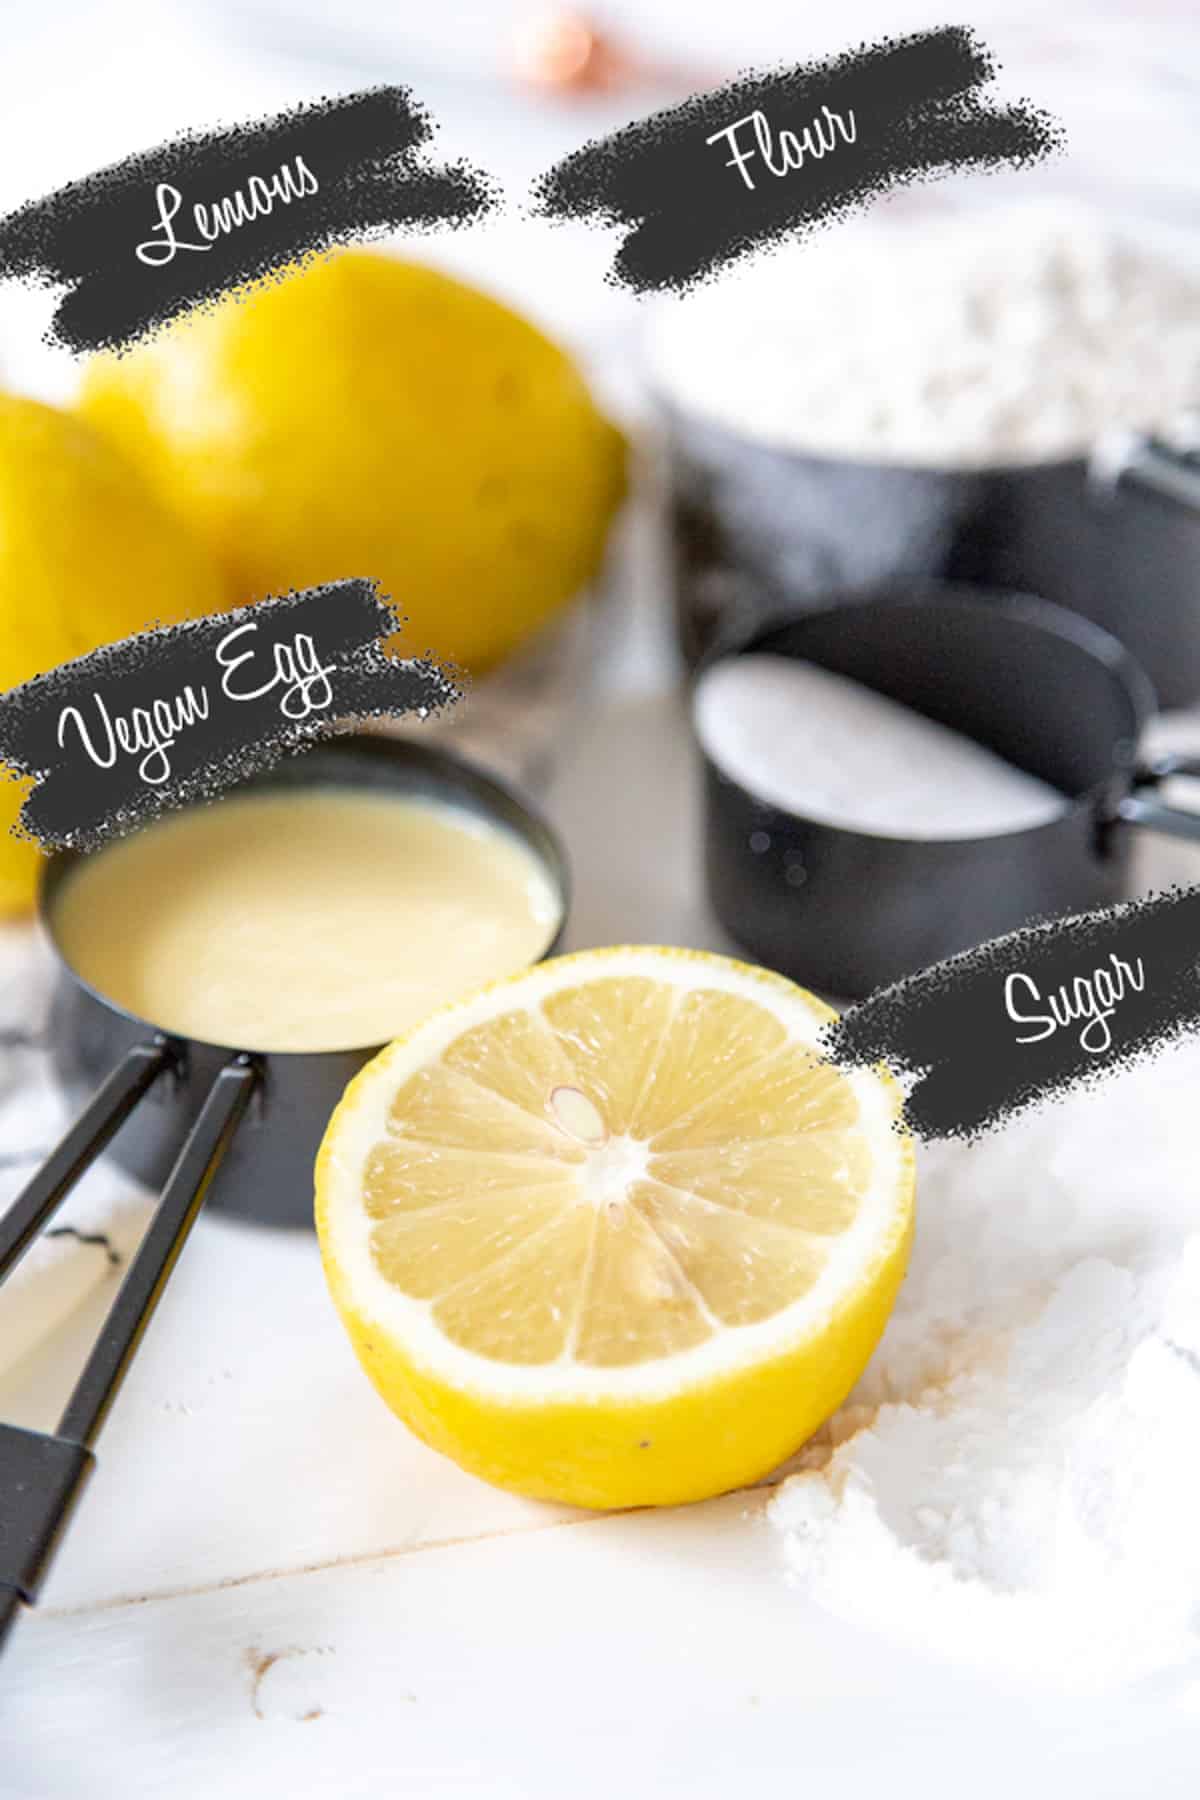 Ingredients for lemon pie with black and white labels next to each ingredient.